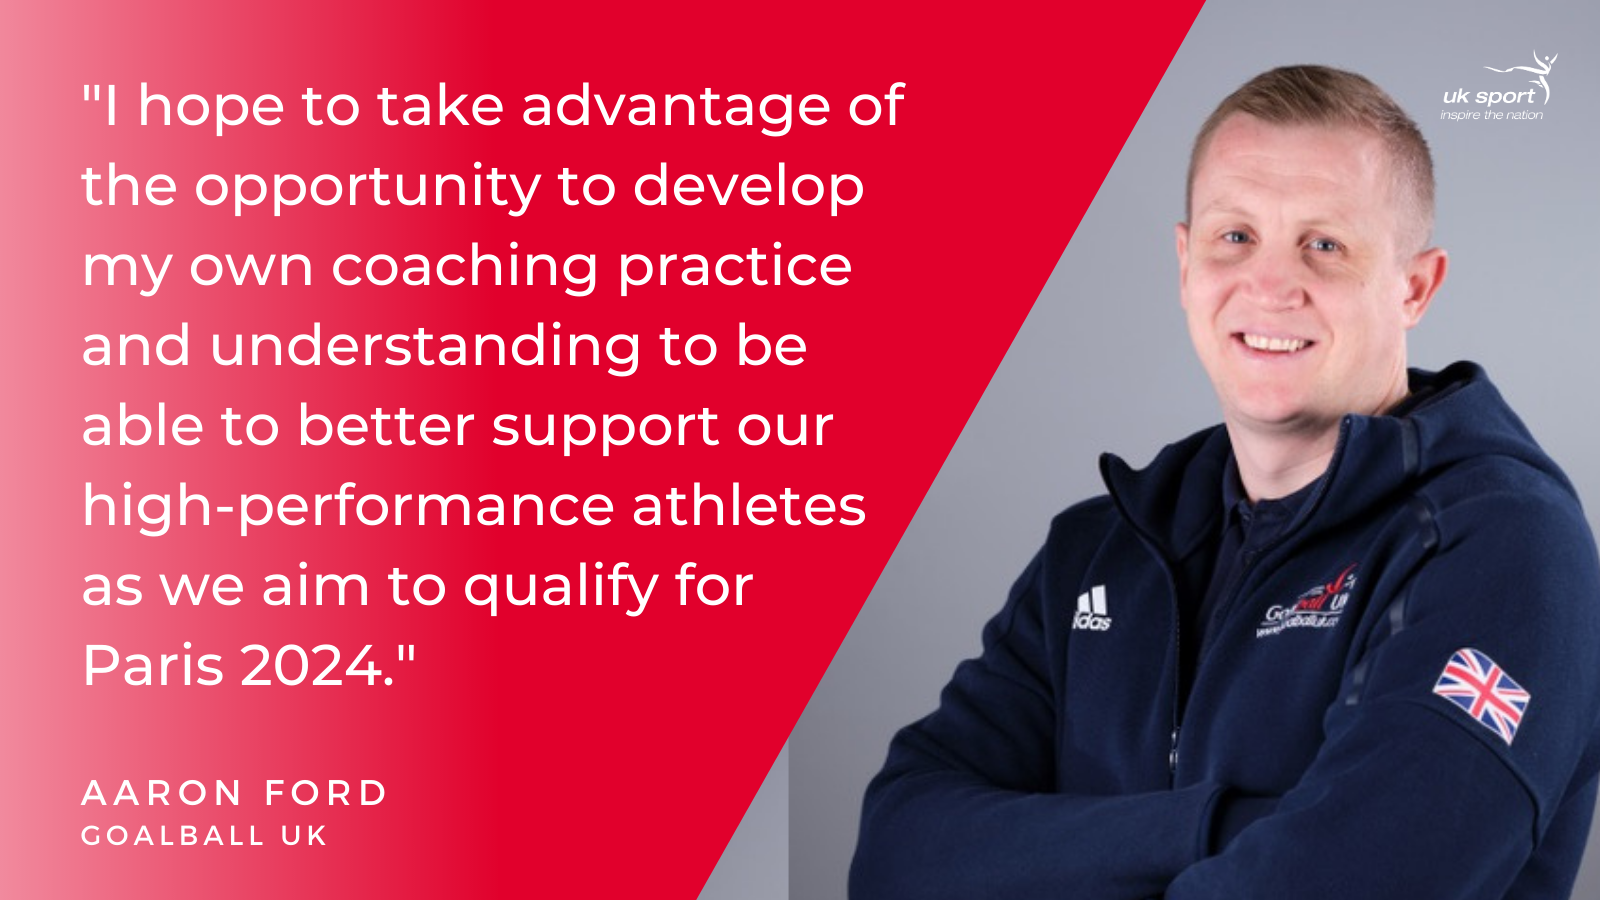 Aaron Ford, GB Women's Head Coach providing his thoughts on being accepted onto the high performance apprenticeship.